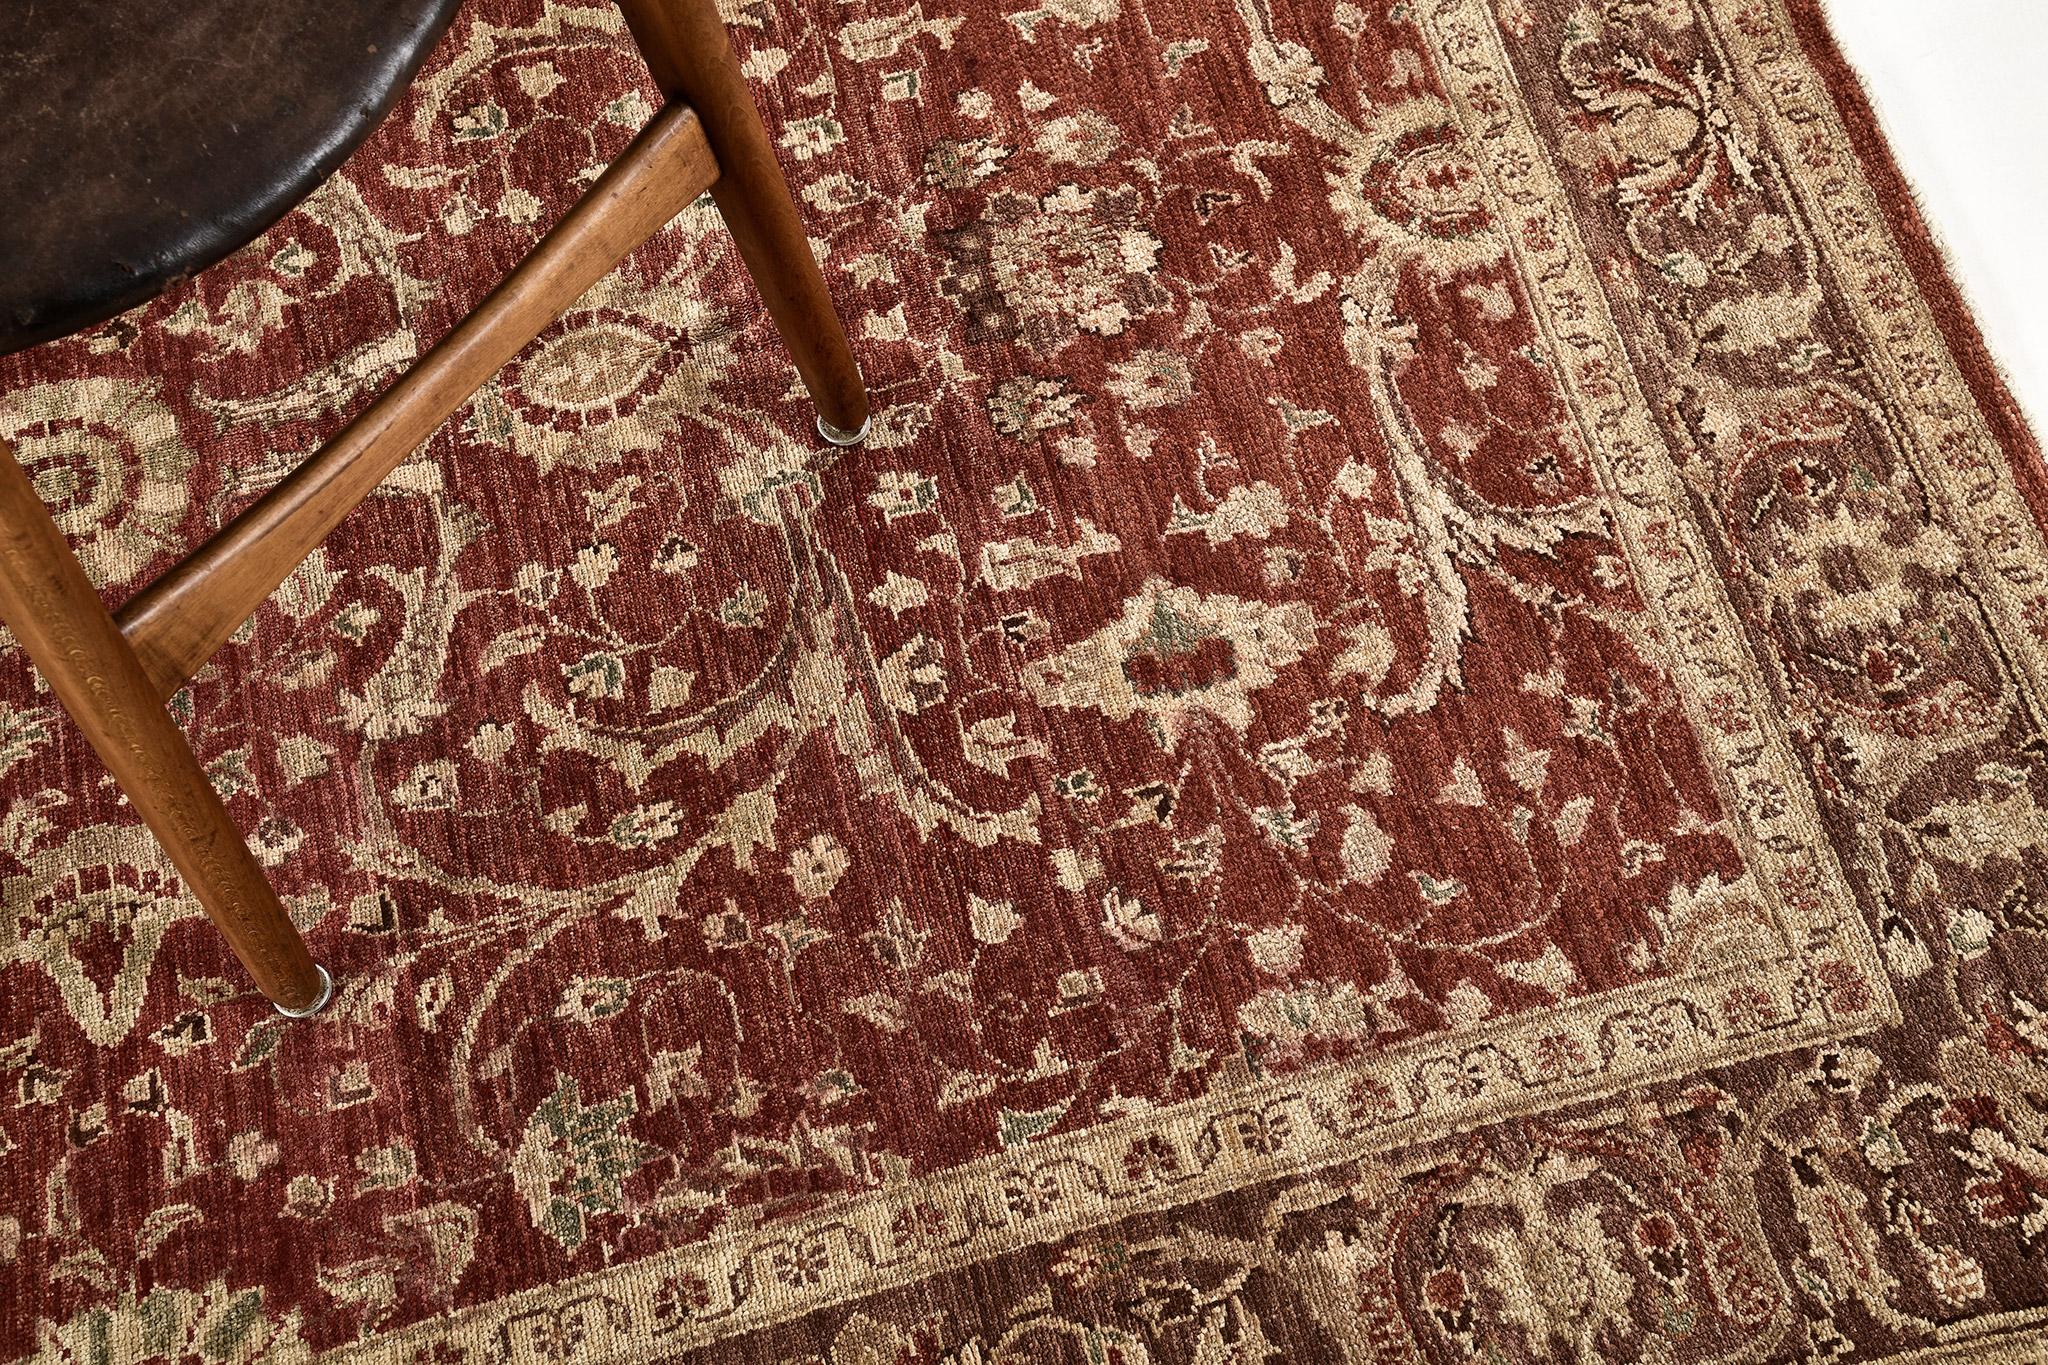 This amazing revival hand spun with vegetable dye, Hadji Jalili Tabriz Rug, is best fit with cozy room ideas. Autumn tones of allover florette designs, leaves, and vines, from field to its borders, are exceptionally coordinated. A New Yorker